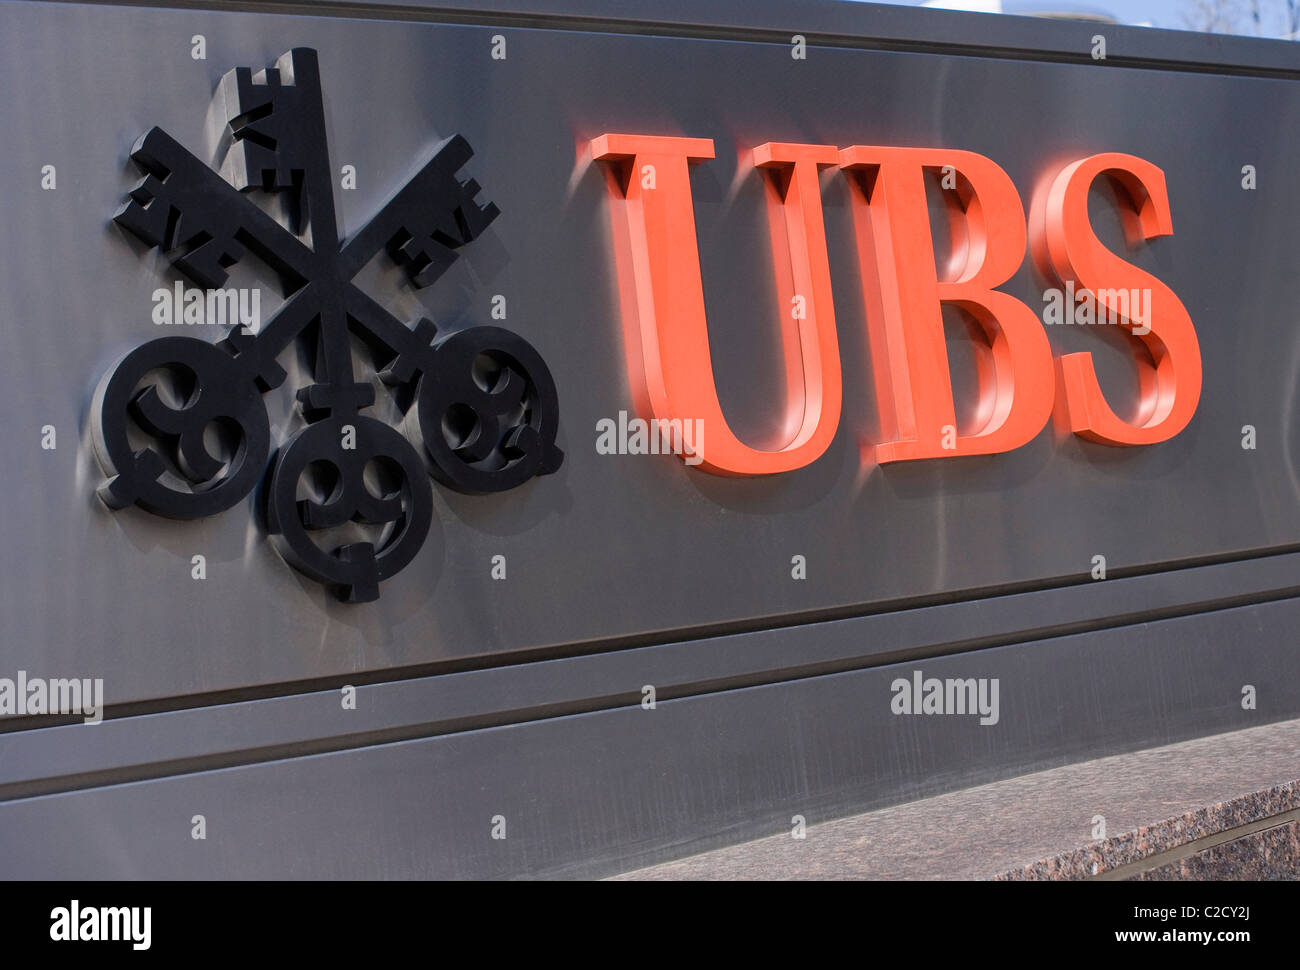 A UBS Bank office building.  Stock Photo